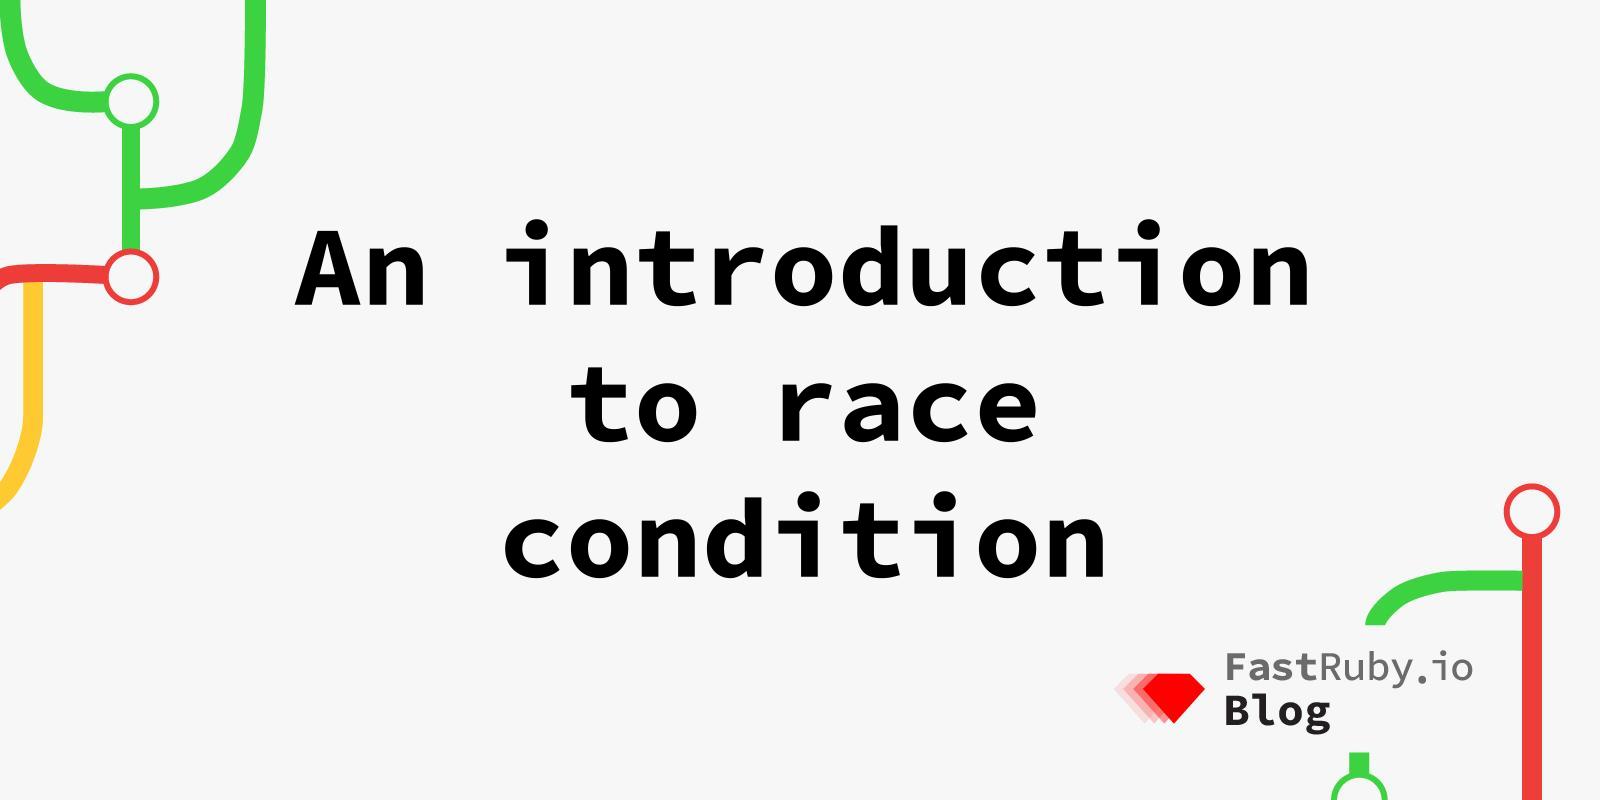 An introduction to race condition